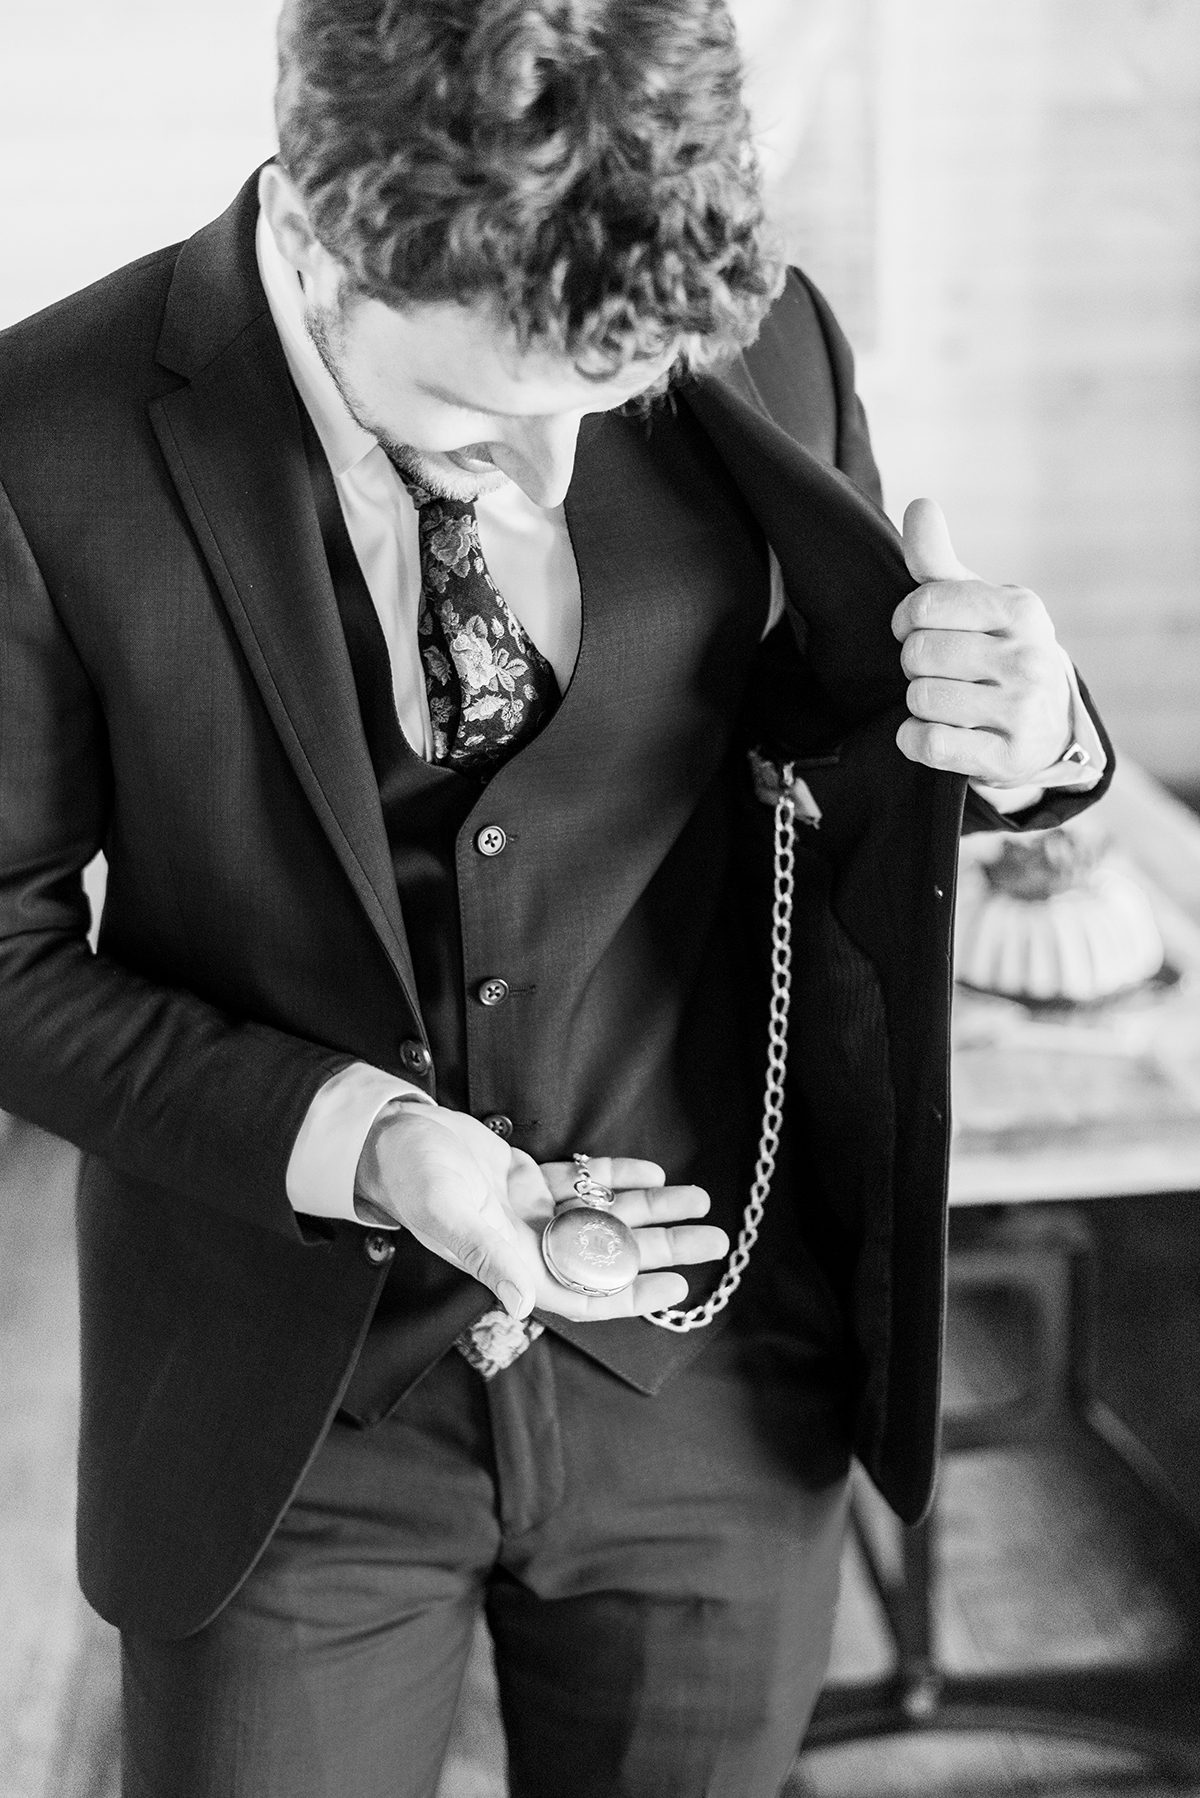 Groom wearing and holding a pocket watch